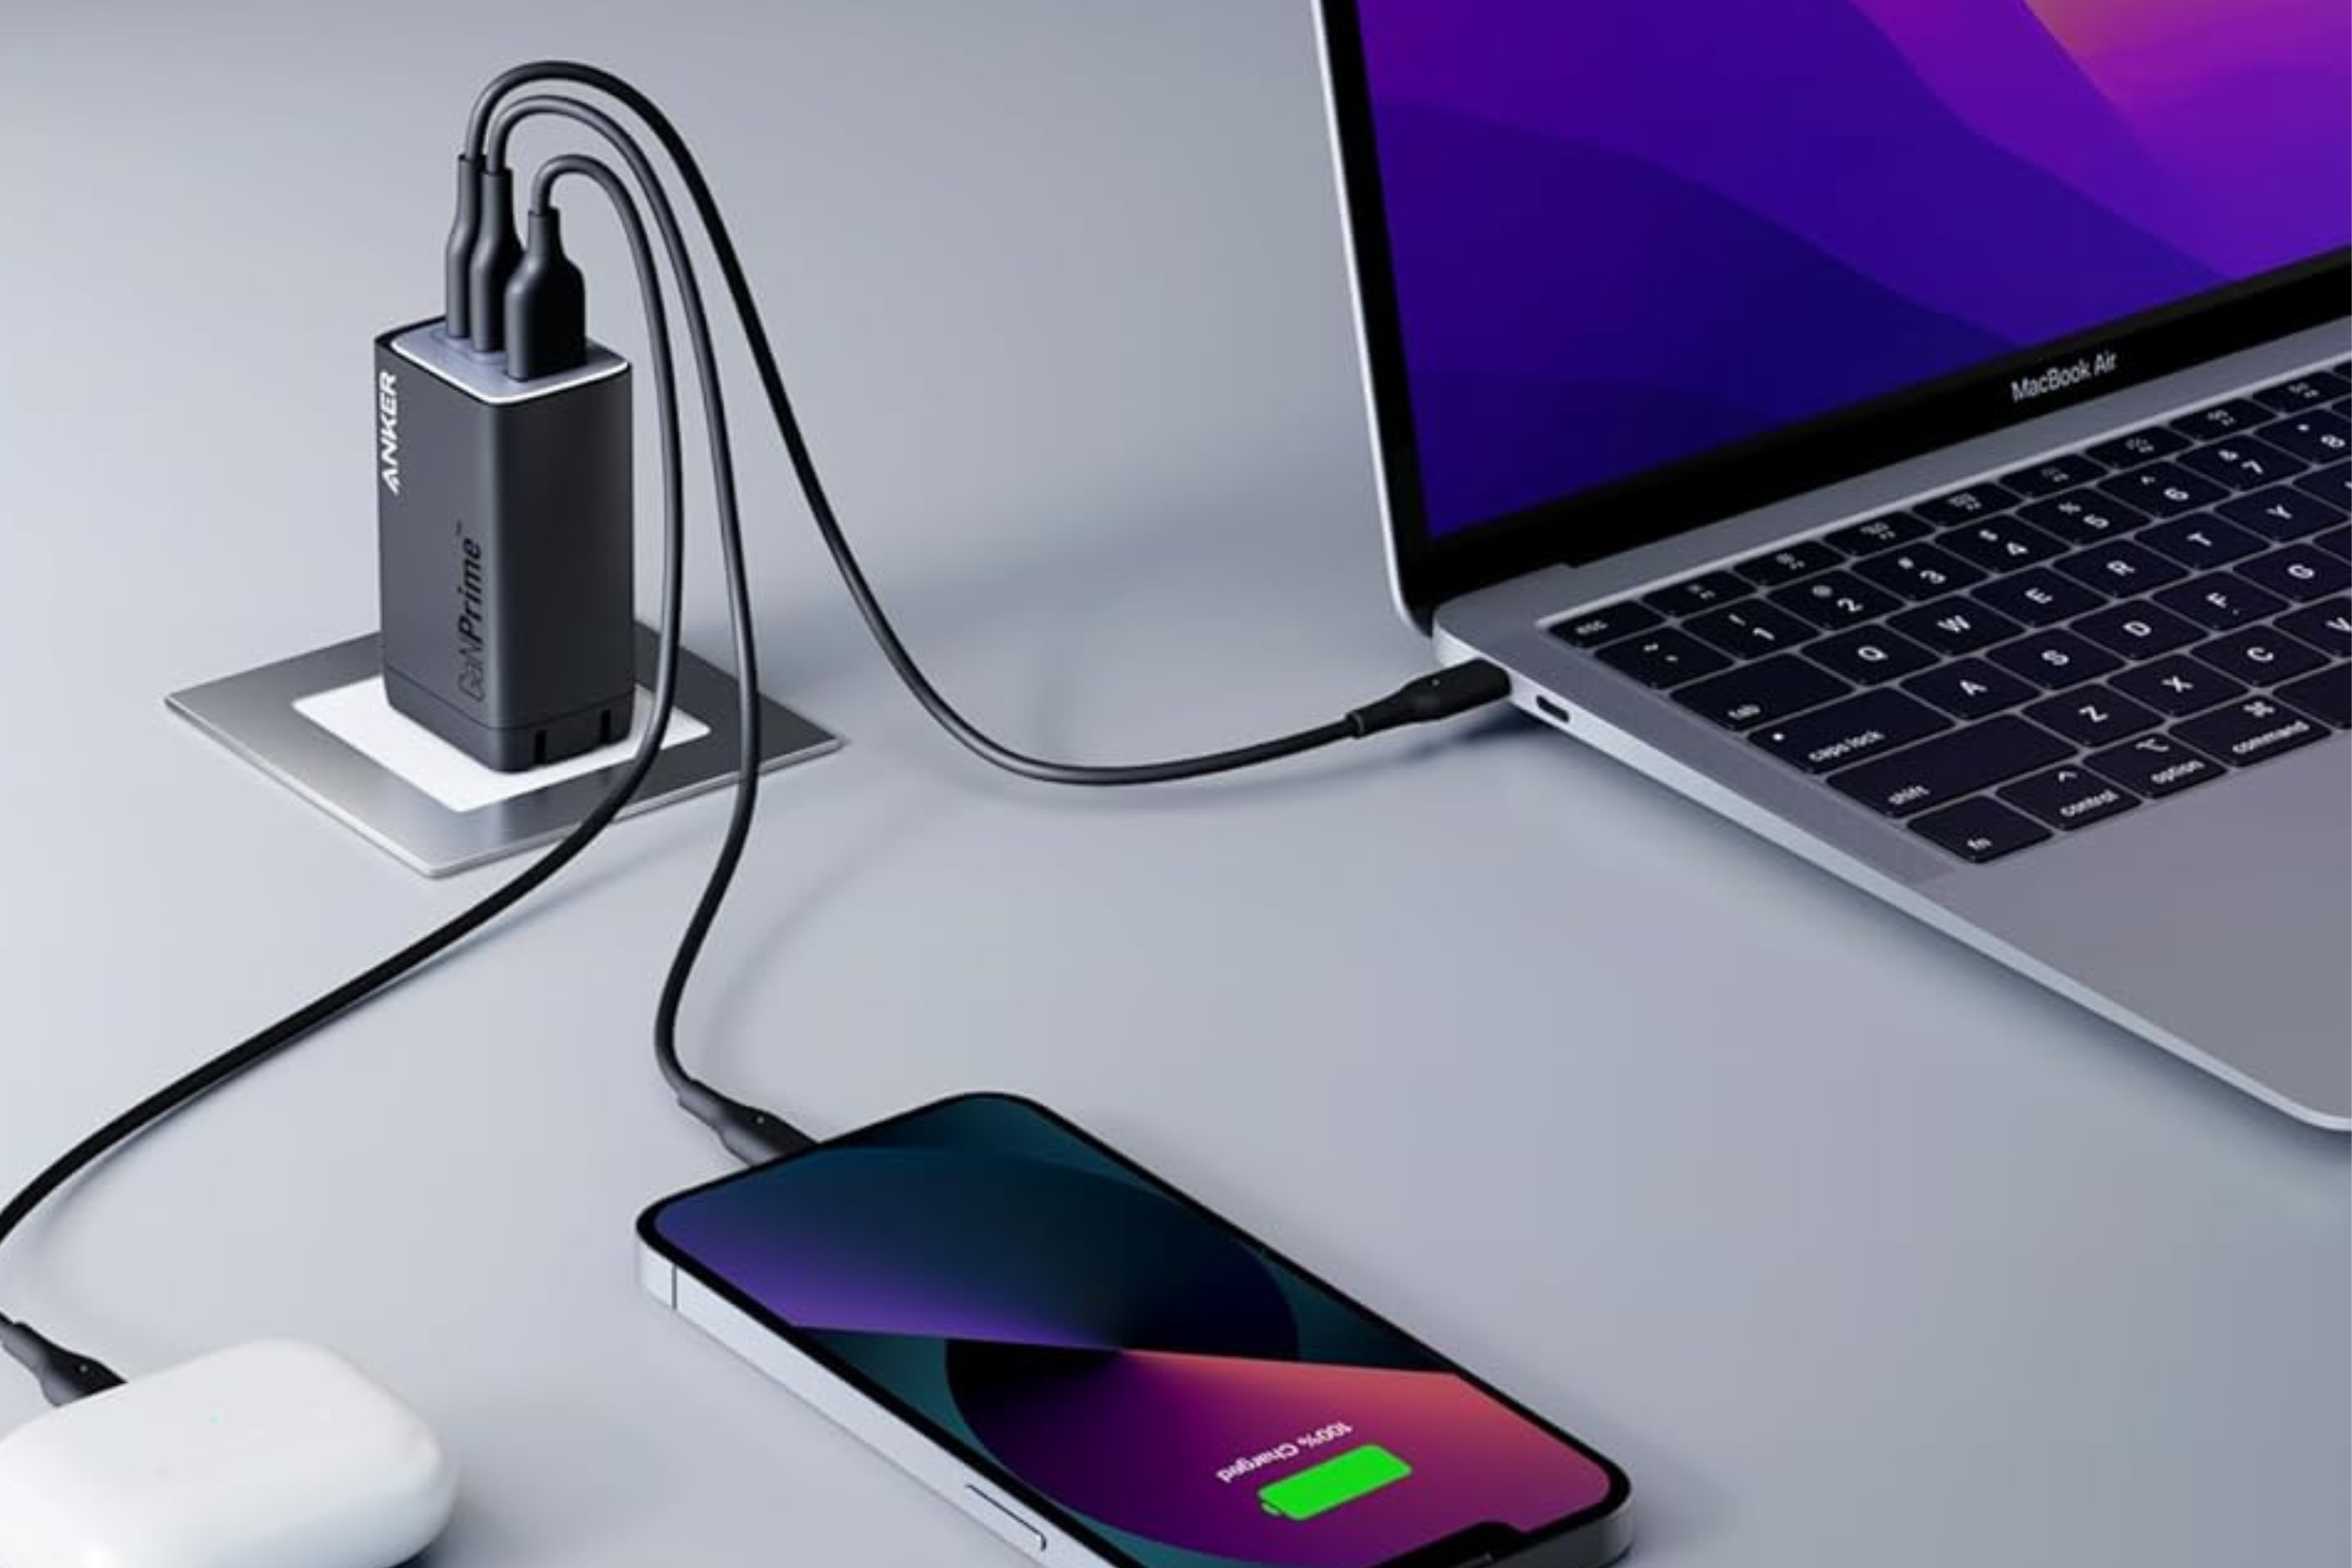 Anker GaNPrime 65W USB C Wall Charger plugged into phone and laptop